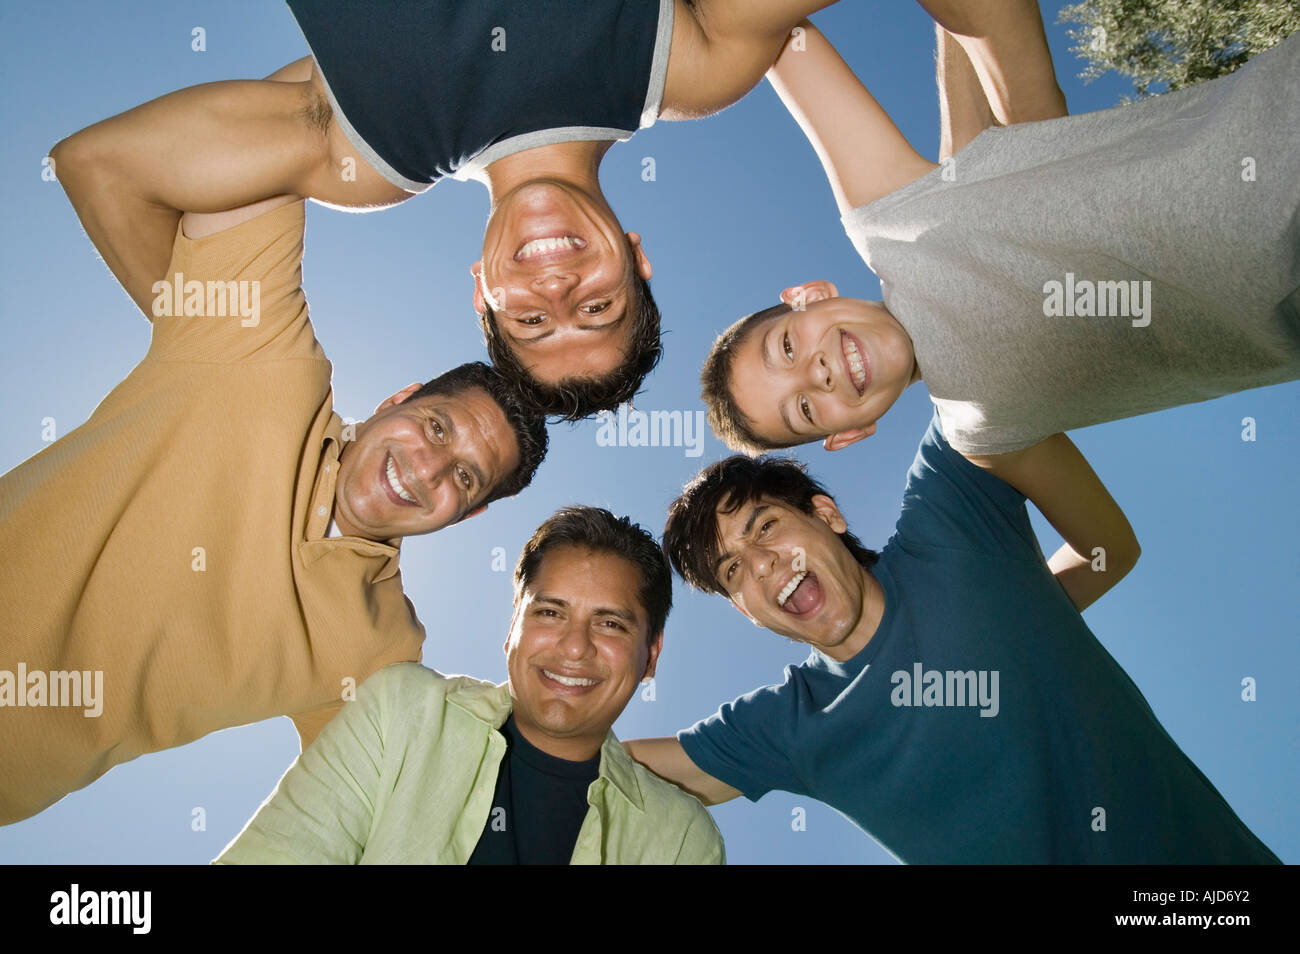 Boy (13-15) with brothers and father in a huddle, view from below. Stock Photo